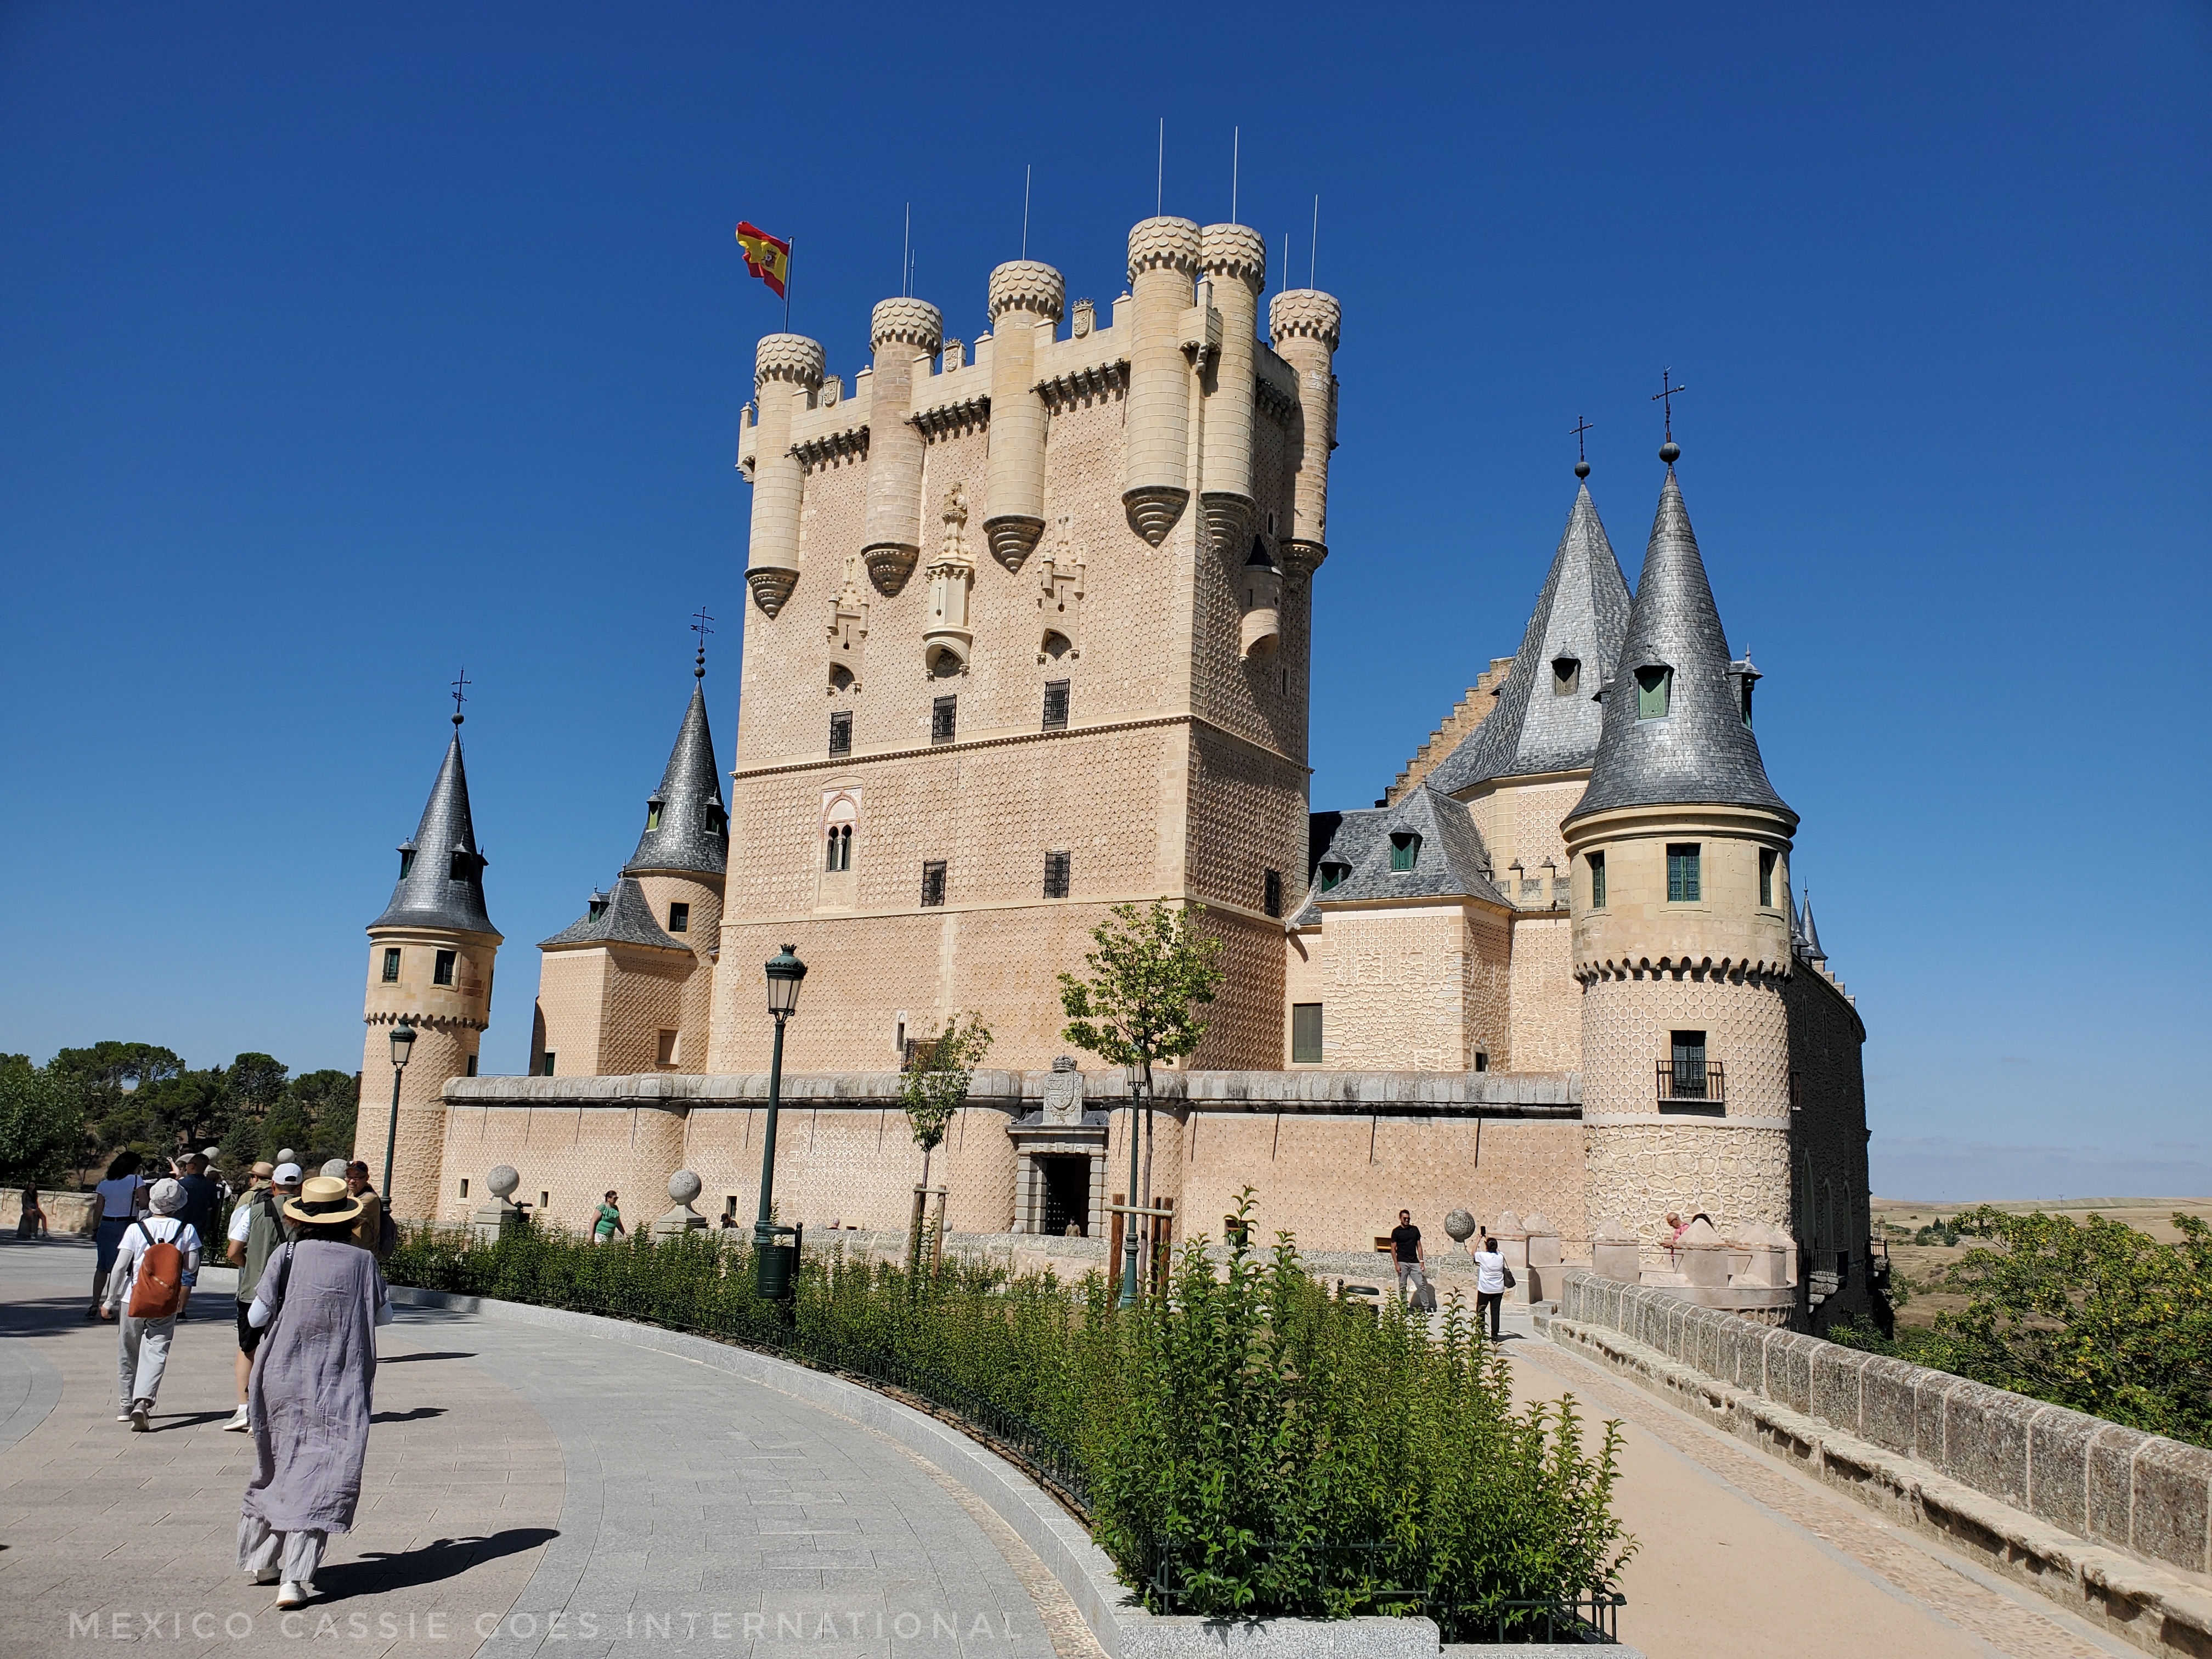 view of Segovia's Alcazar from the main approach. Torre del Homenaje in front with flag flying. Grey roofed turrets on each corner